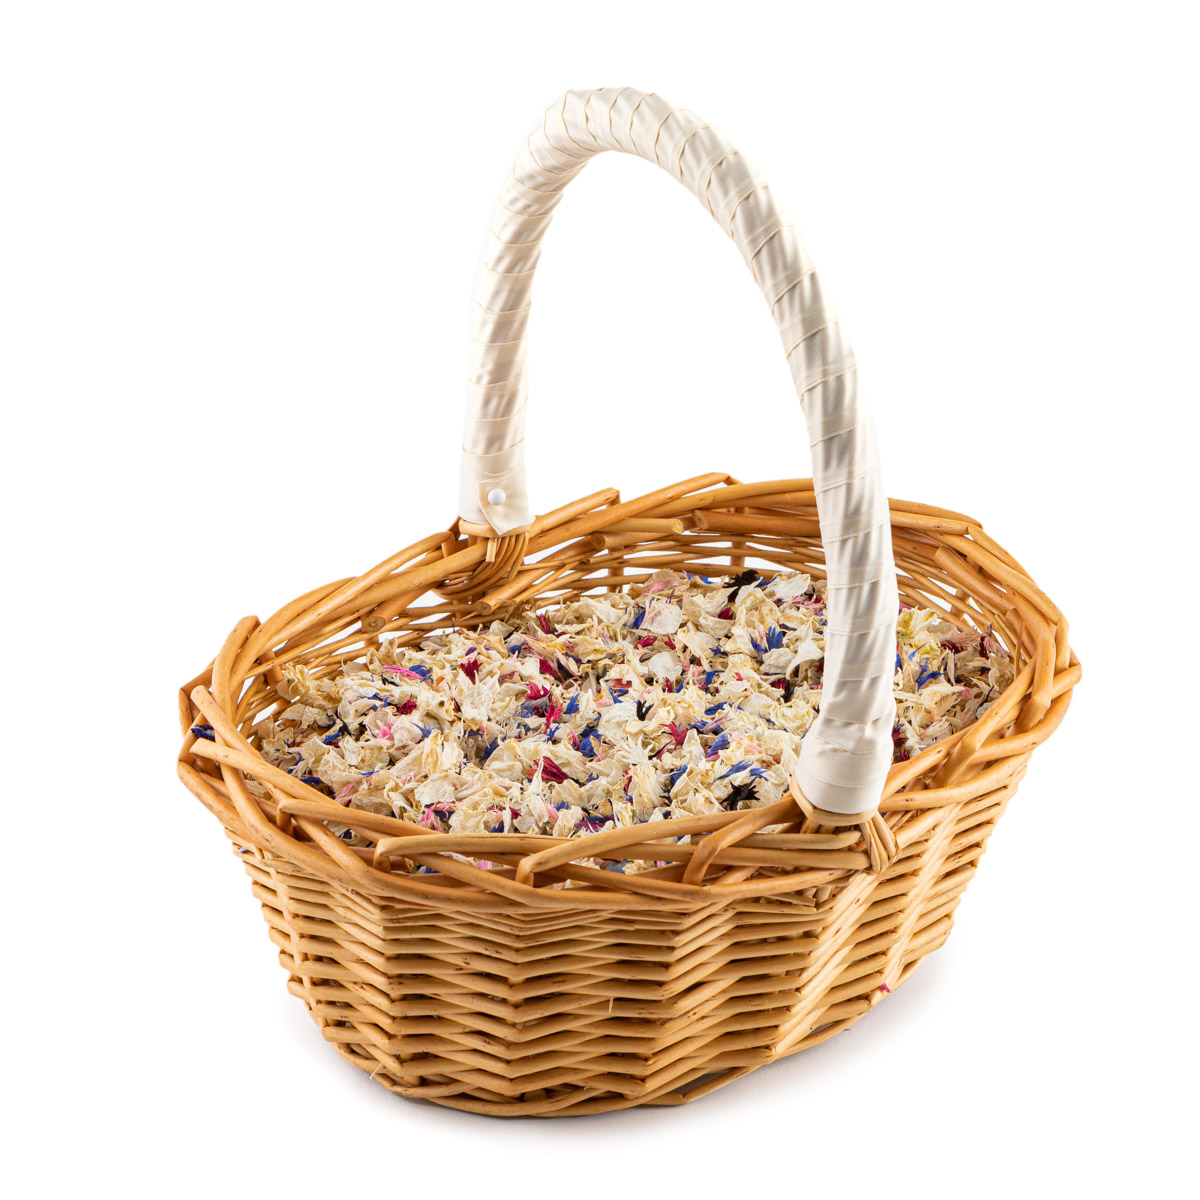 An Oval basket filled with flower petal confetti